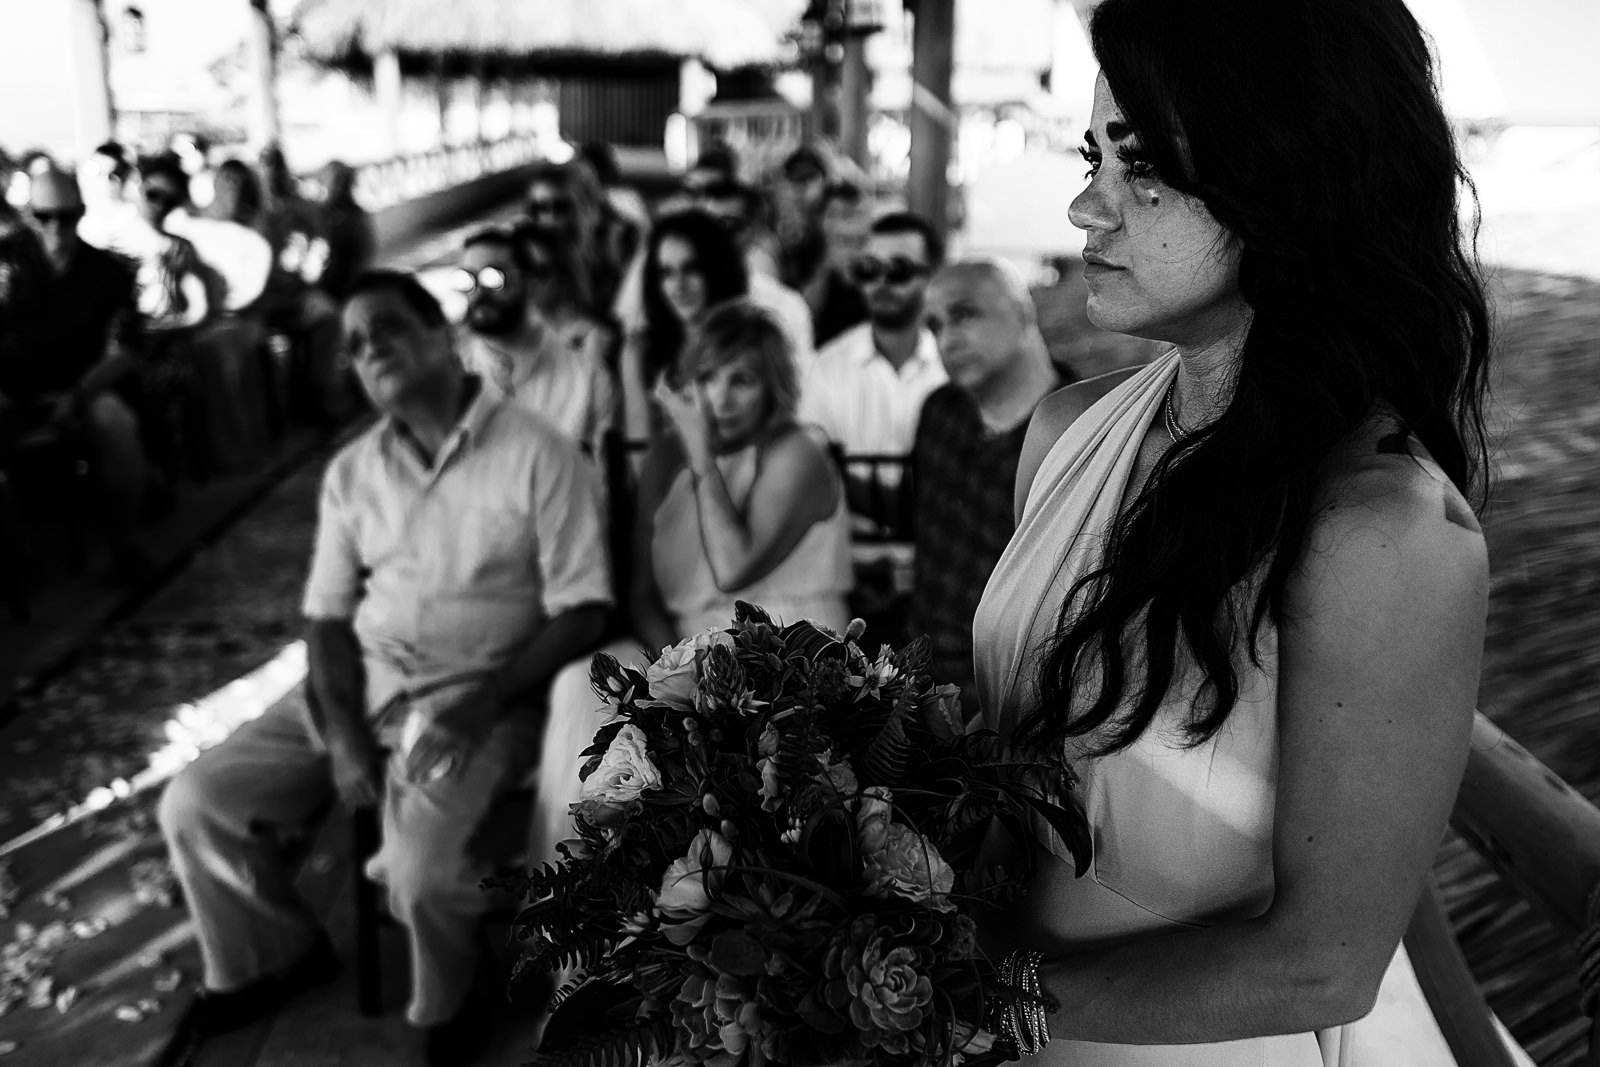 Maid-of-honor crying during the wedding ceremony, the mother of the bride can be seen also crying in the background